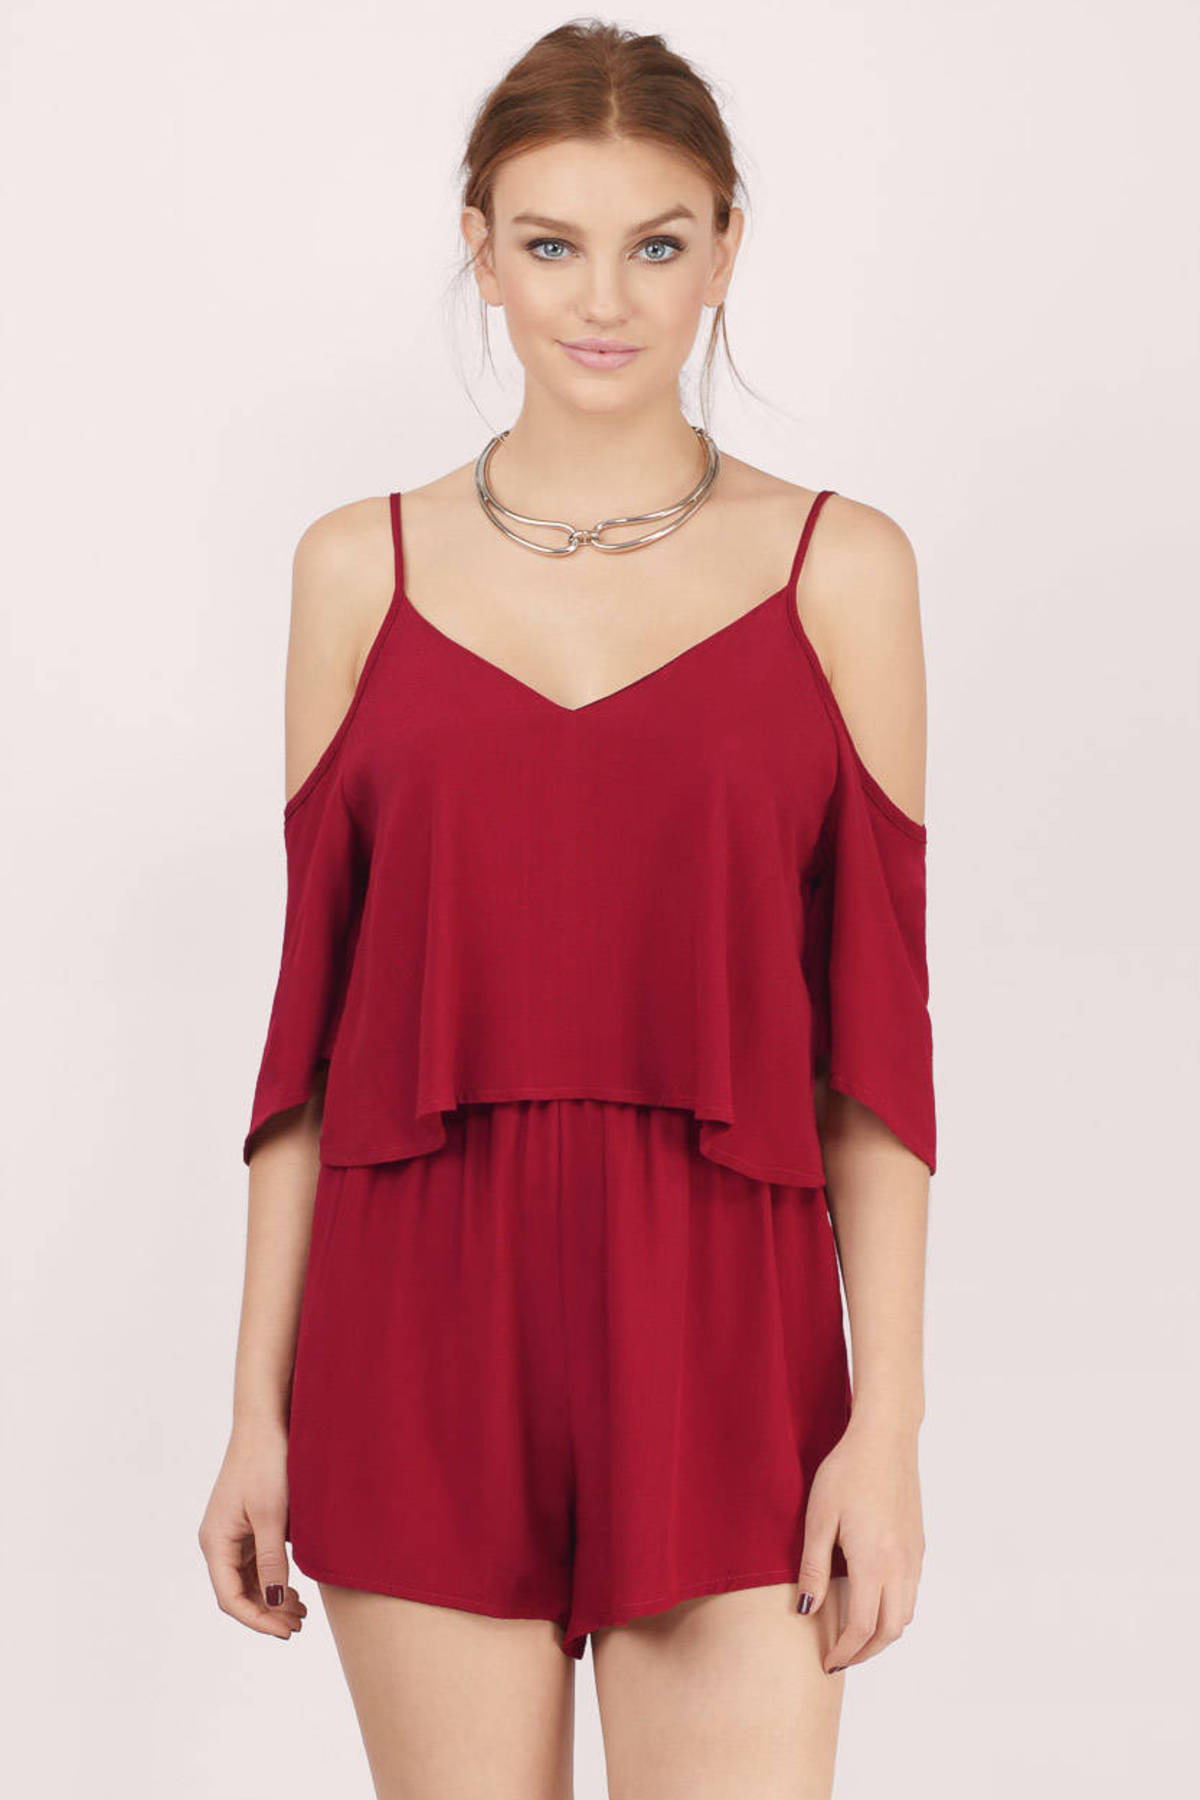 All The Tiers Cold Shoulder Romper in Wine - $56 | Tobi US